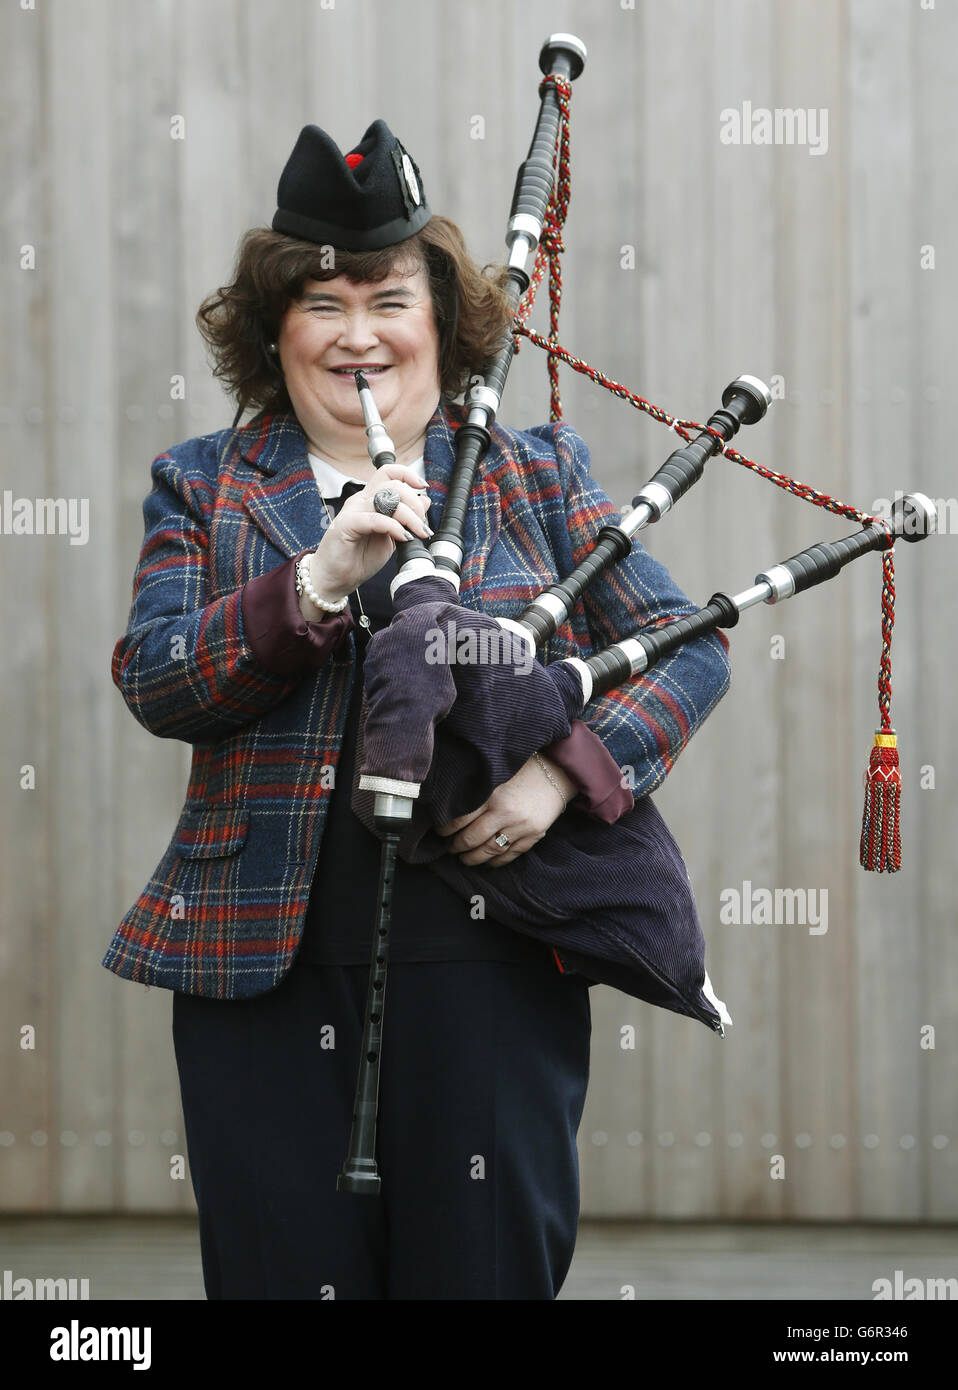 Susan Boyle at pipe band event Stock Photo